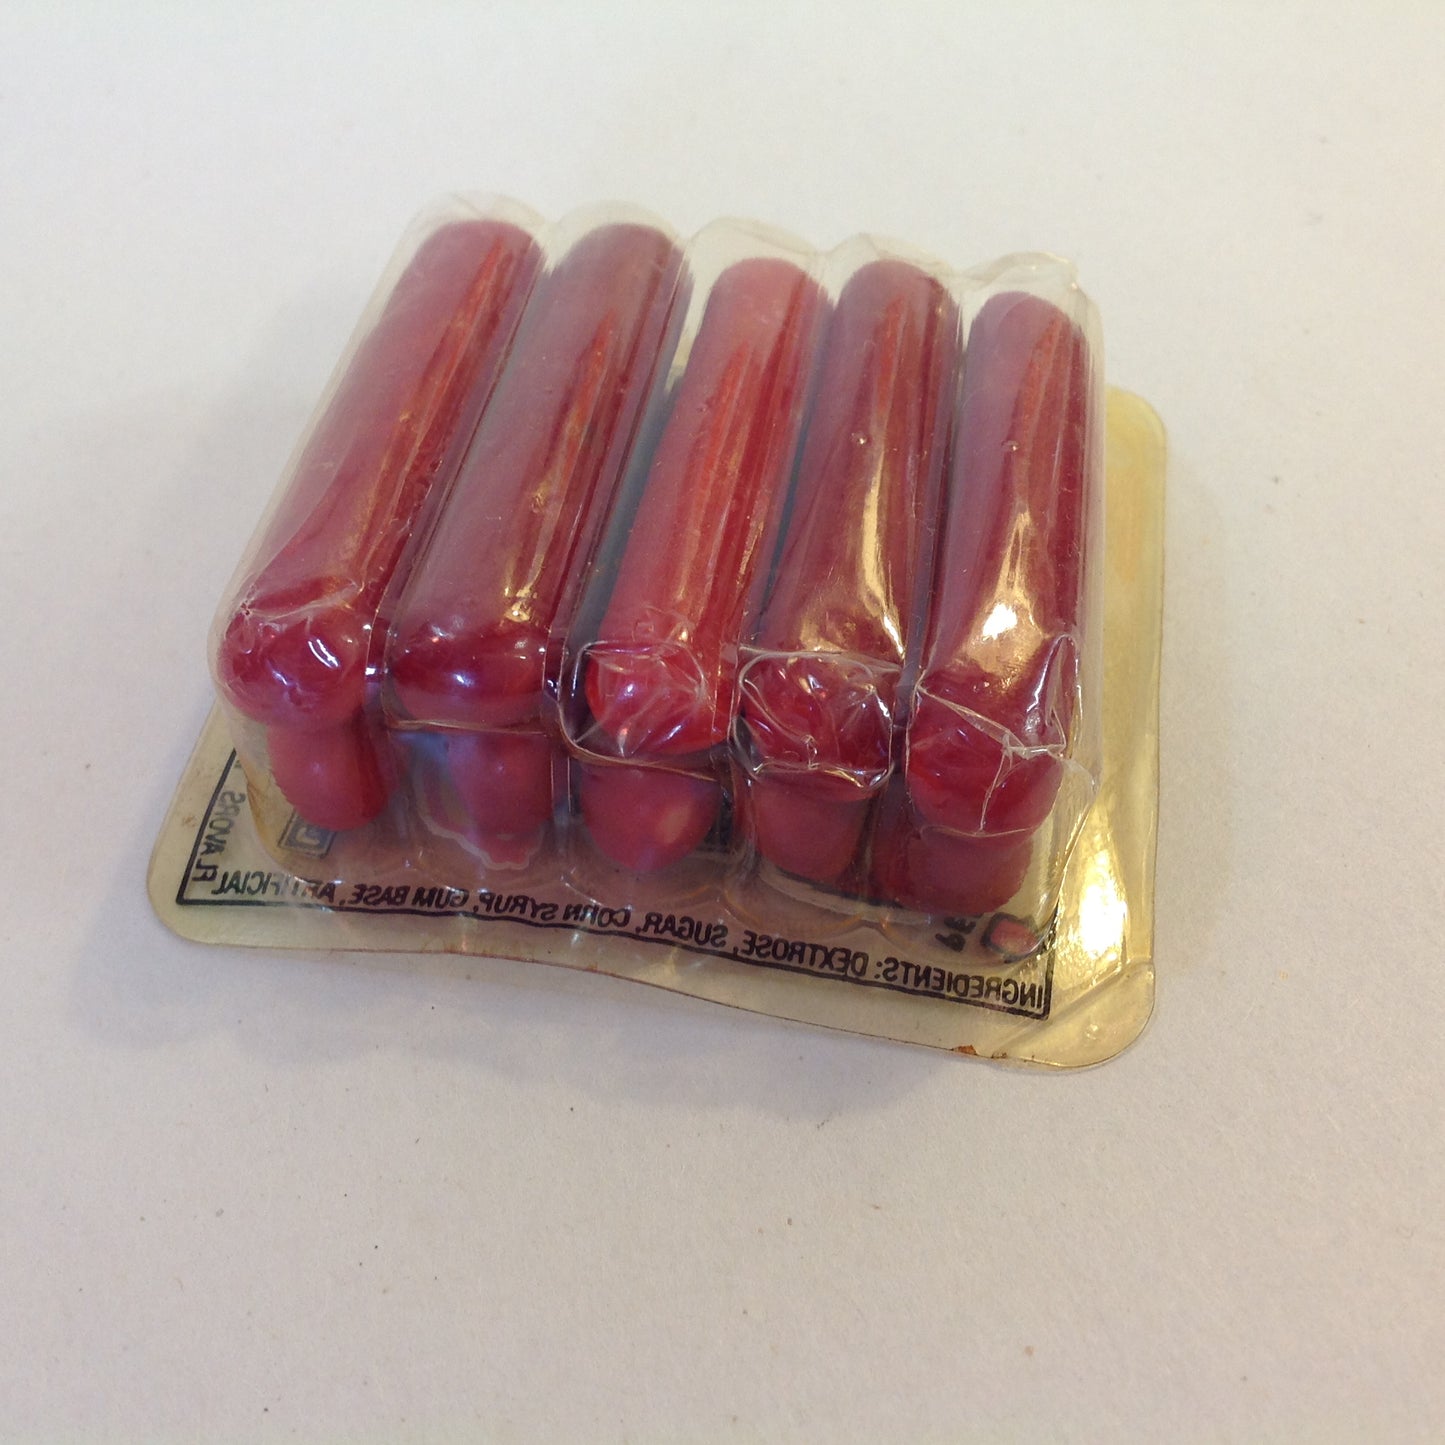 Vintage NOS Unopened LEAF Hot Dog! 10 Piece Bubble Gum Candy Container